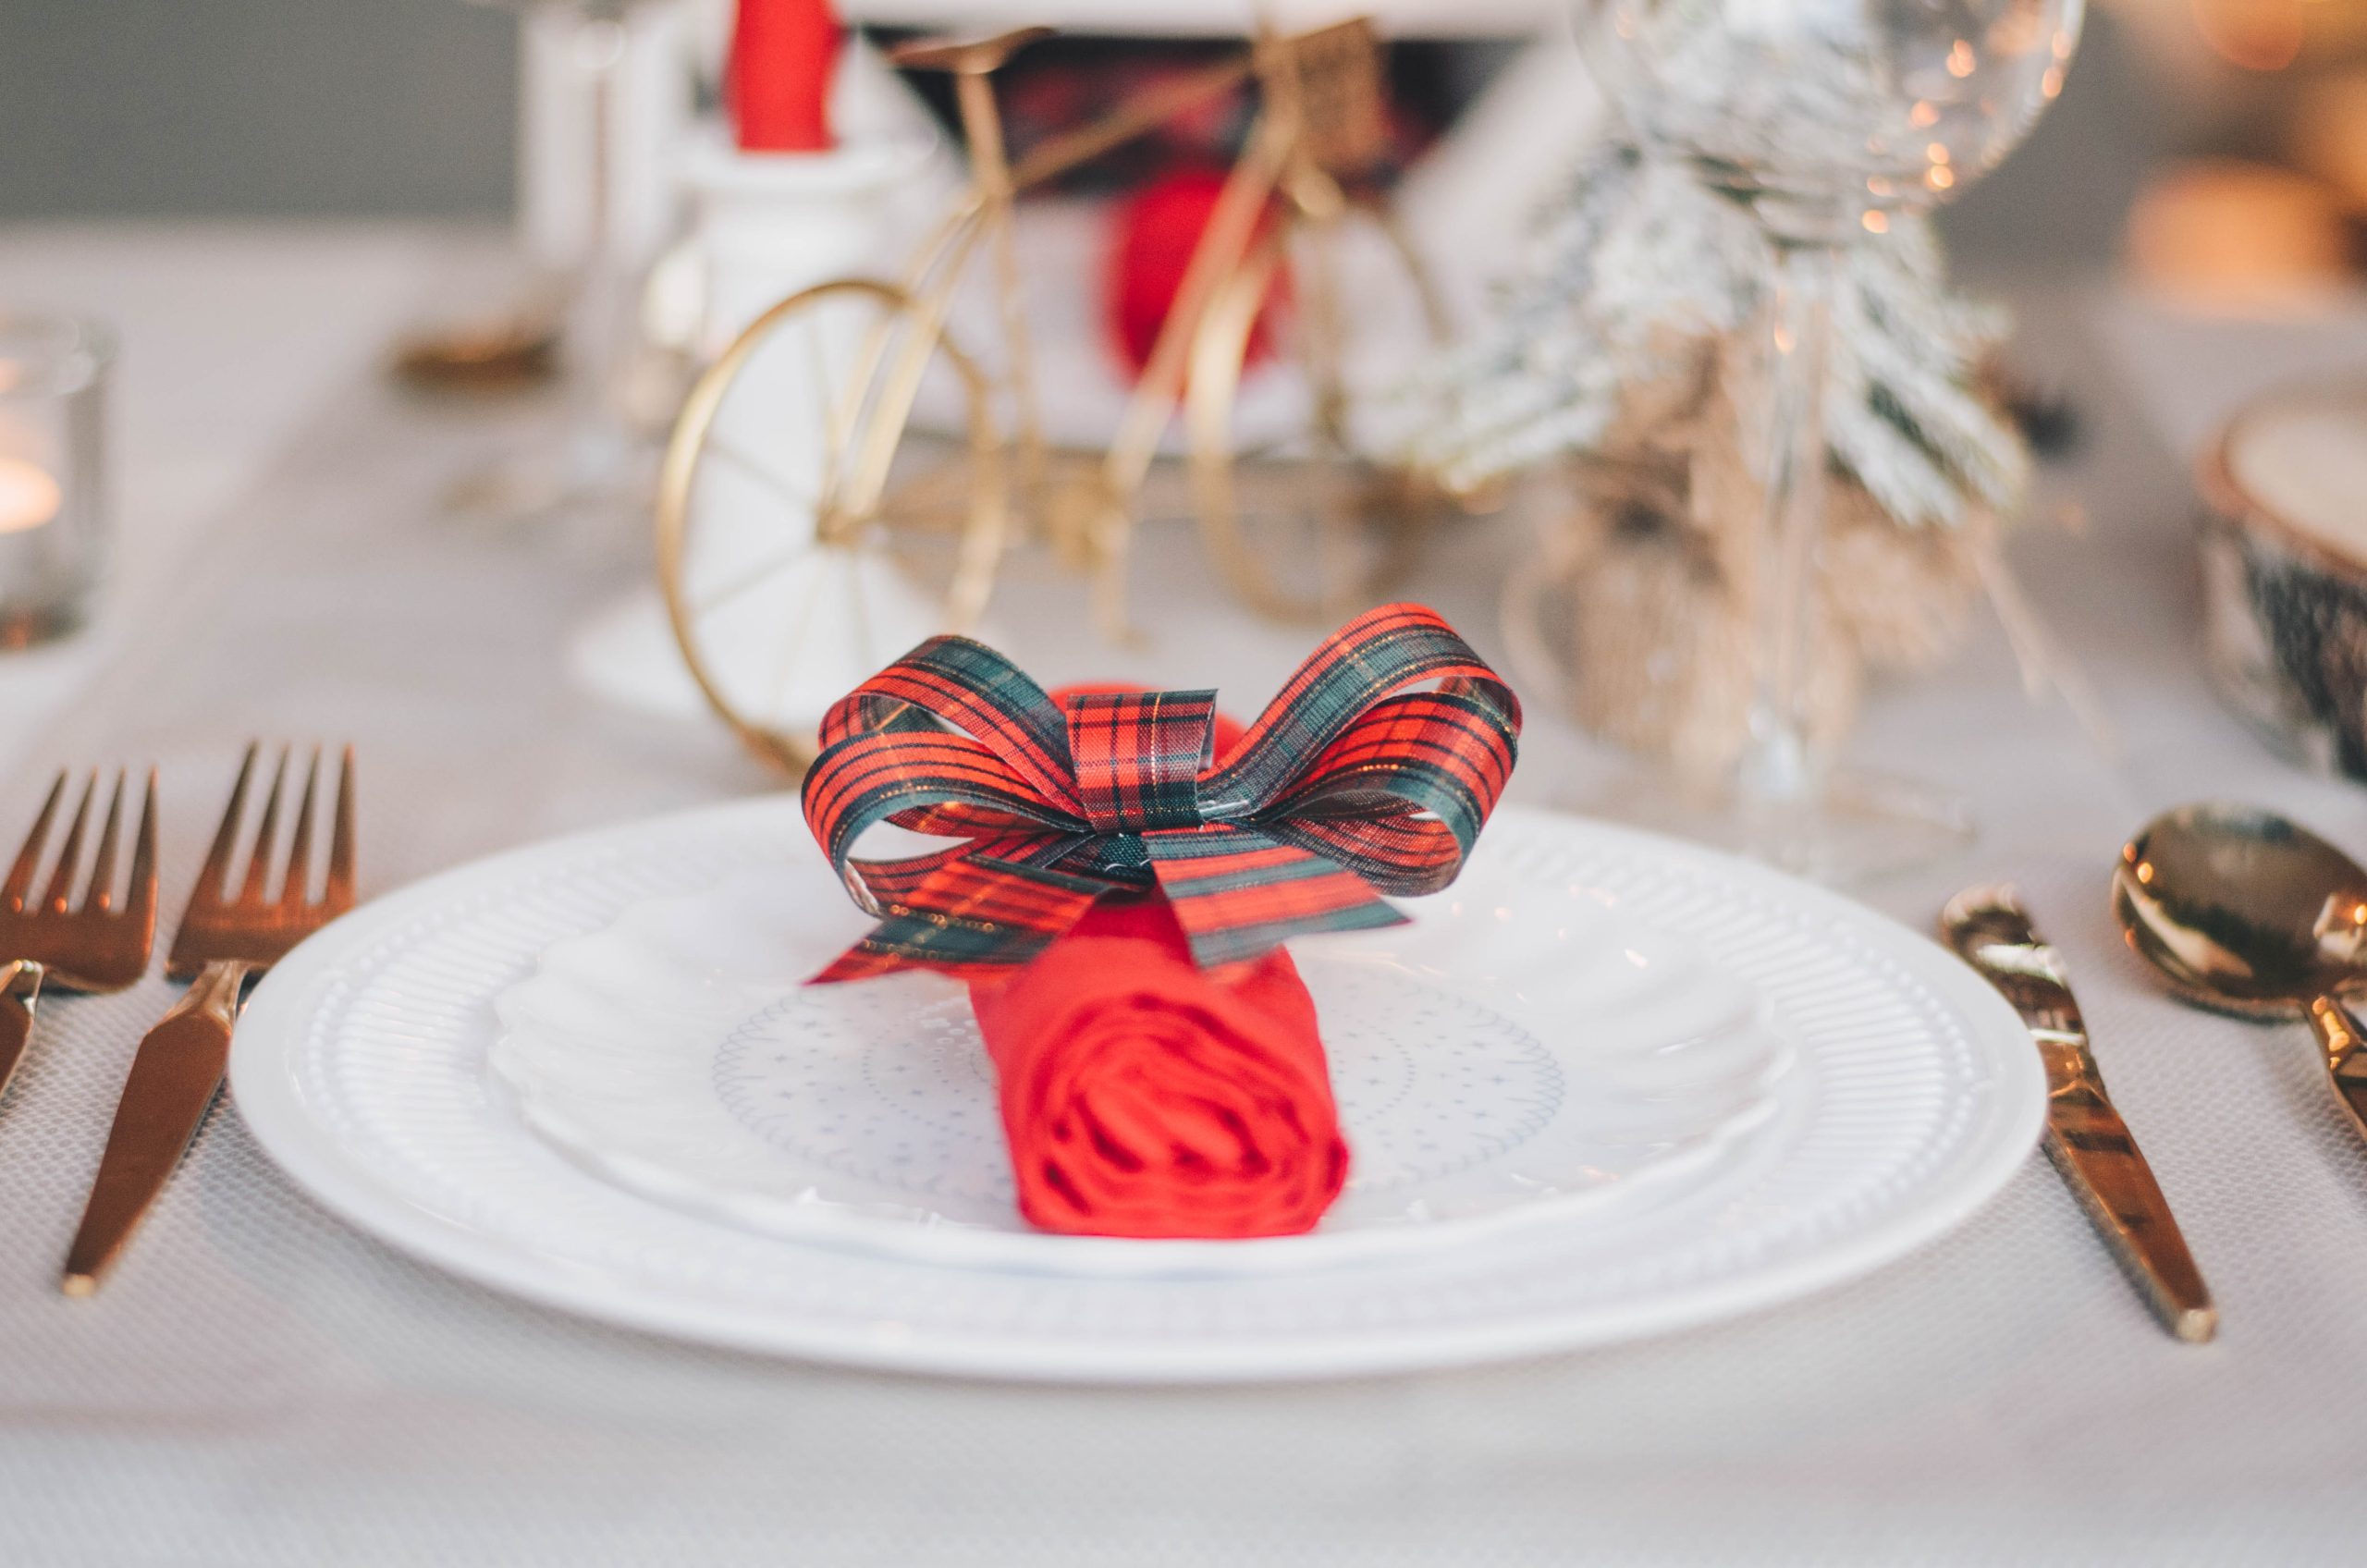 Holiday dinner, photo by Libby Penner via Unsplash.